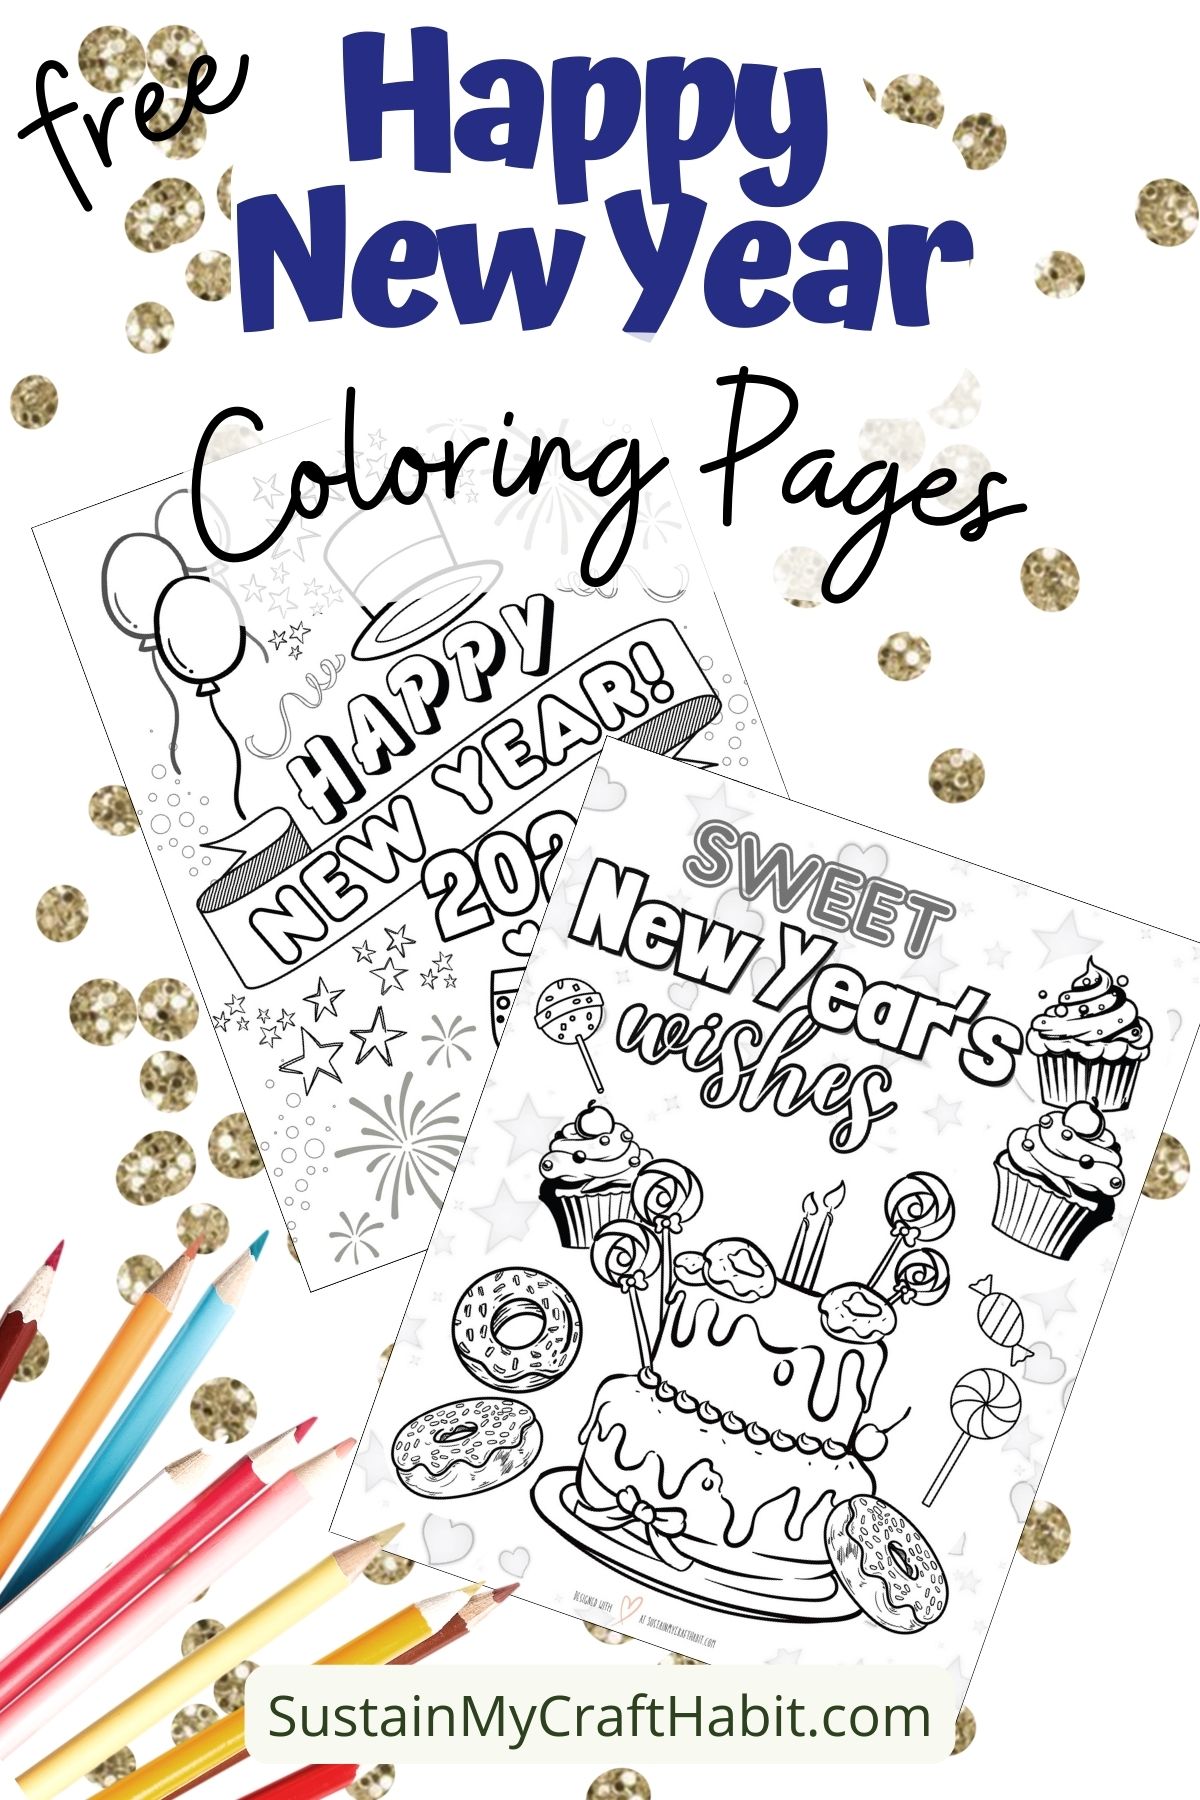 Free happy new year coloring pages printable for â sustain my craft habit